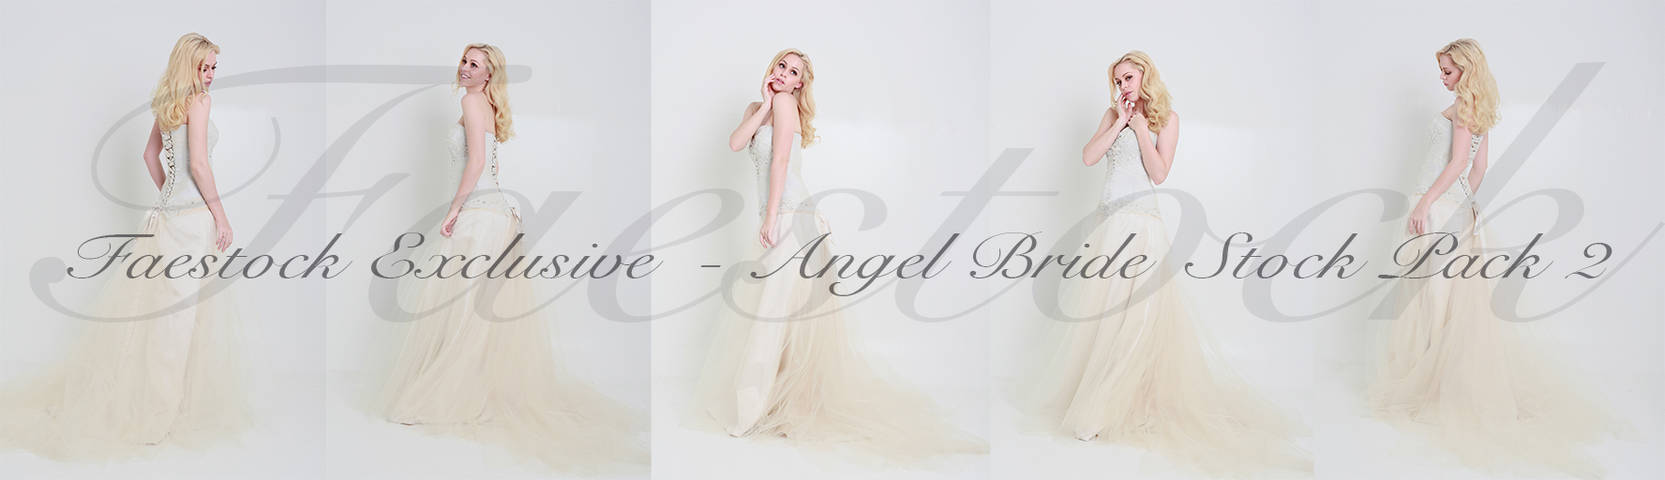 Bridal Exclusive Stock Pack 2 by faestock